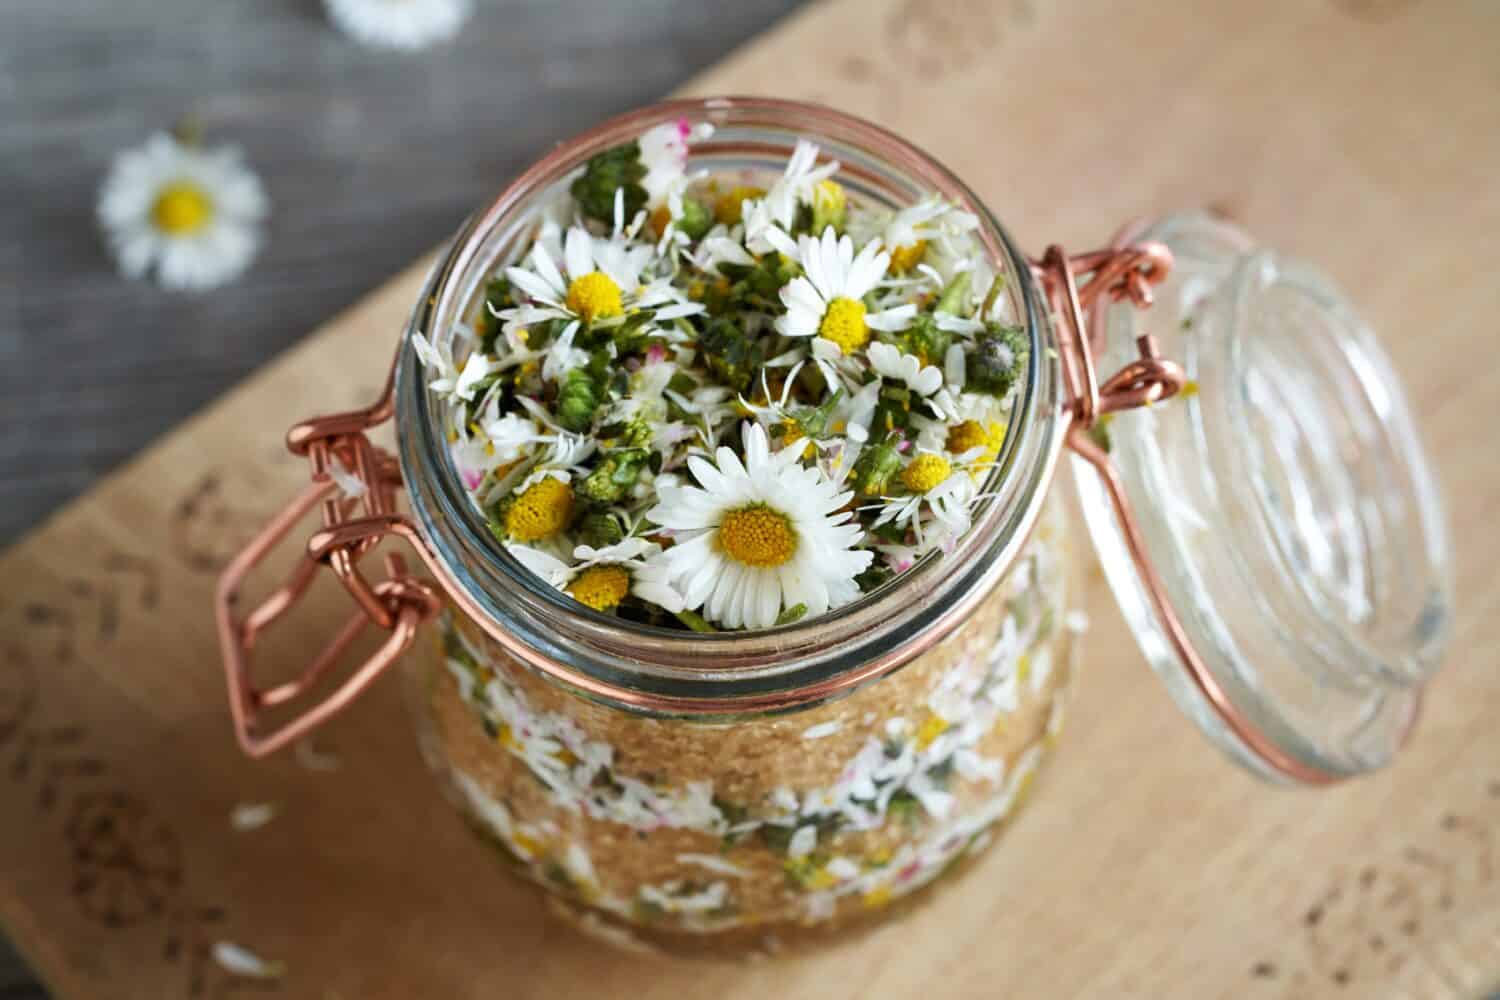 Preparation of herbal syrup from fresh common daisy or Bellis perennis flowers and cane sugar